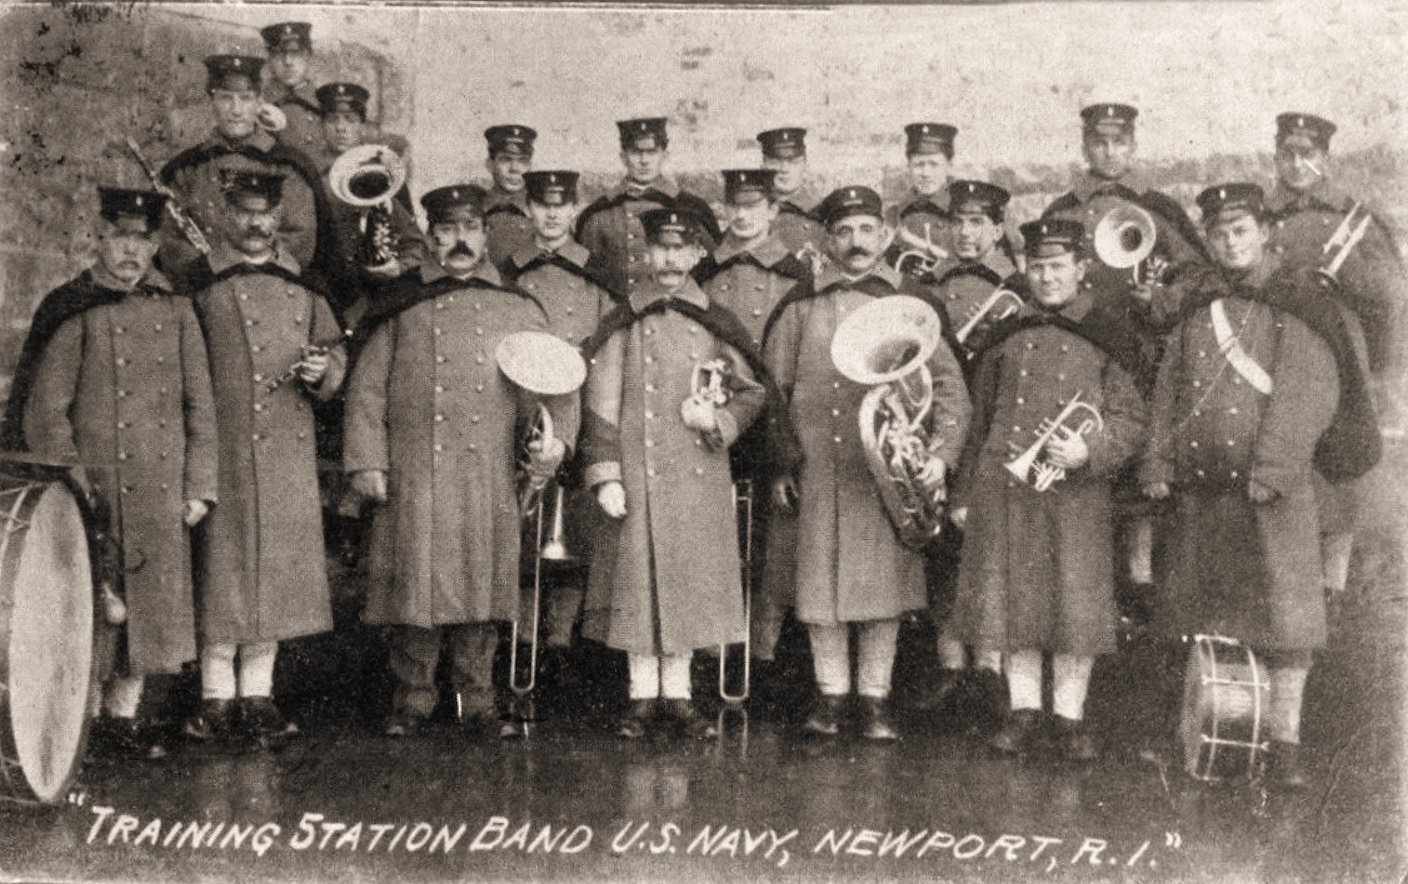 The Naval Training Station Band